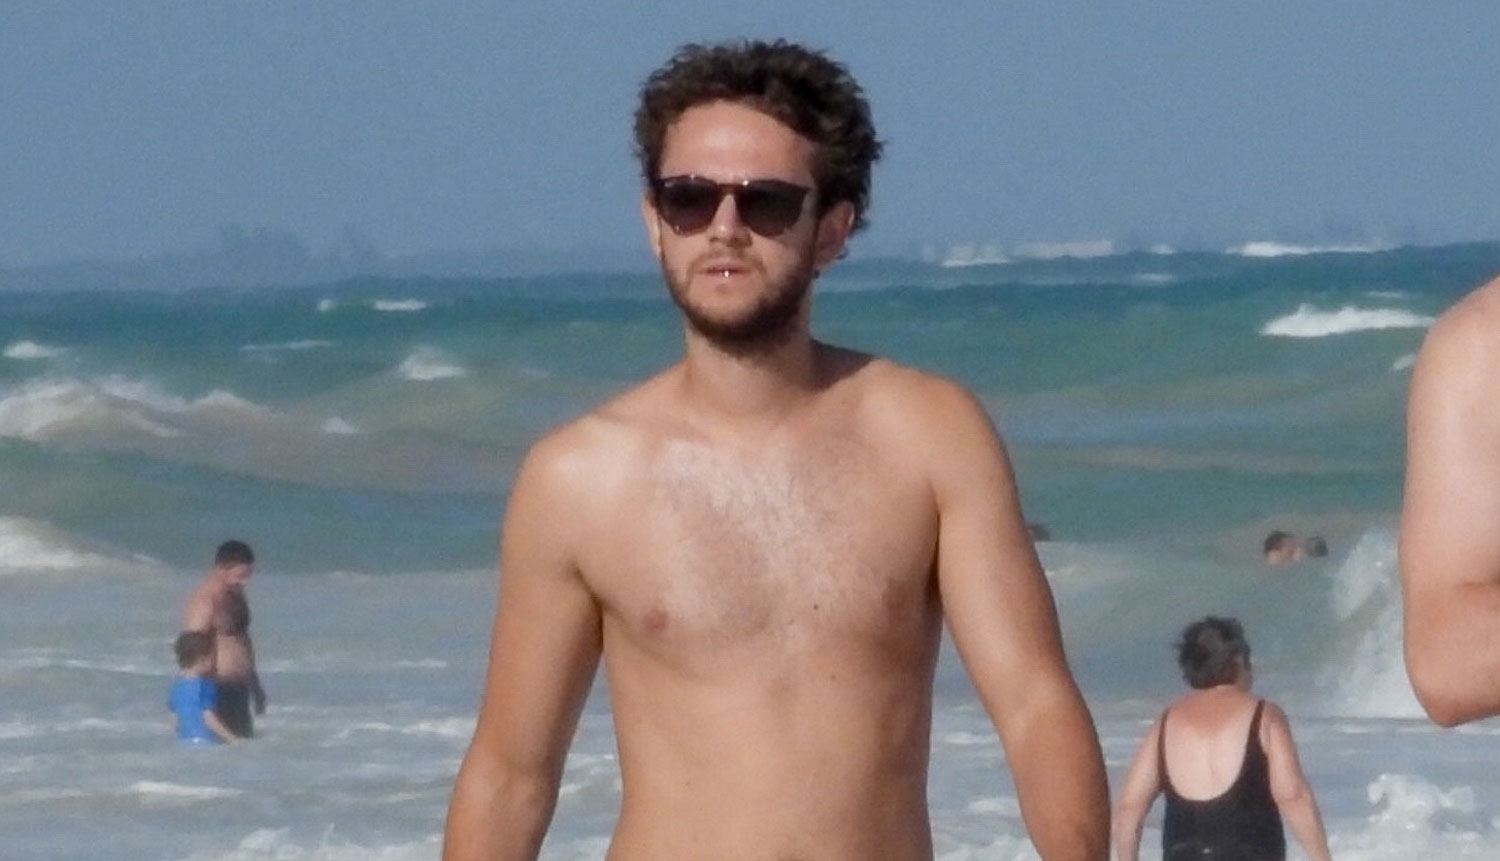 Zedd Goes Shirtless for a Walk on the Beach in Tulum.